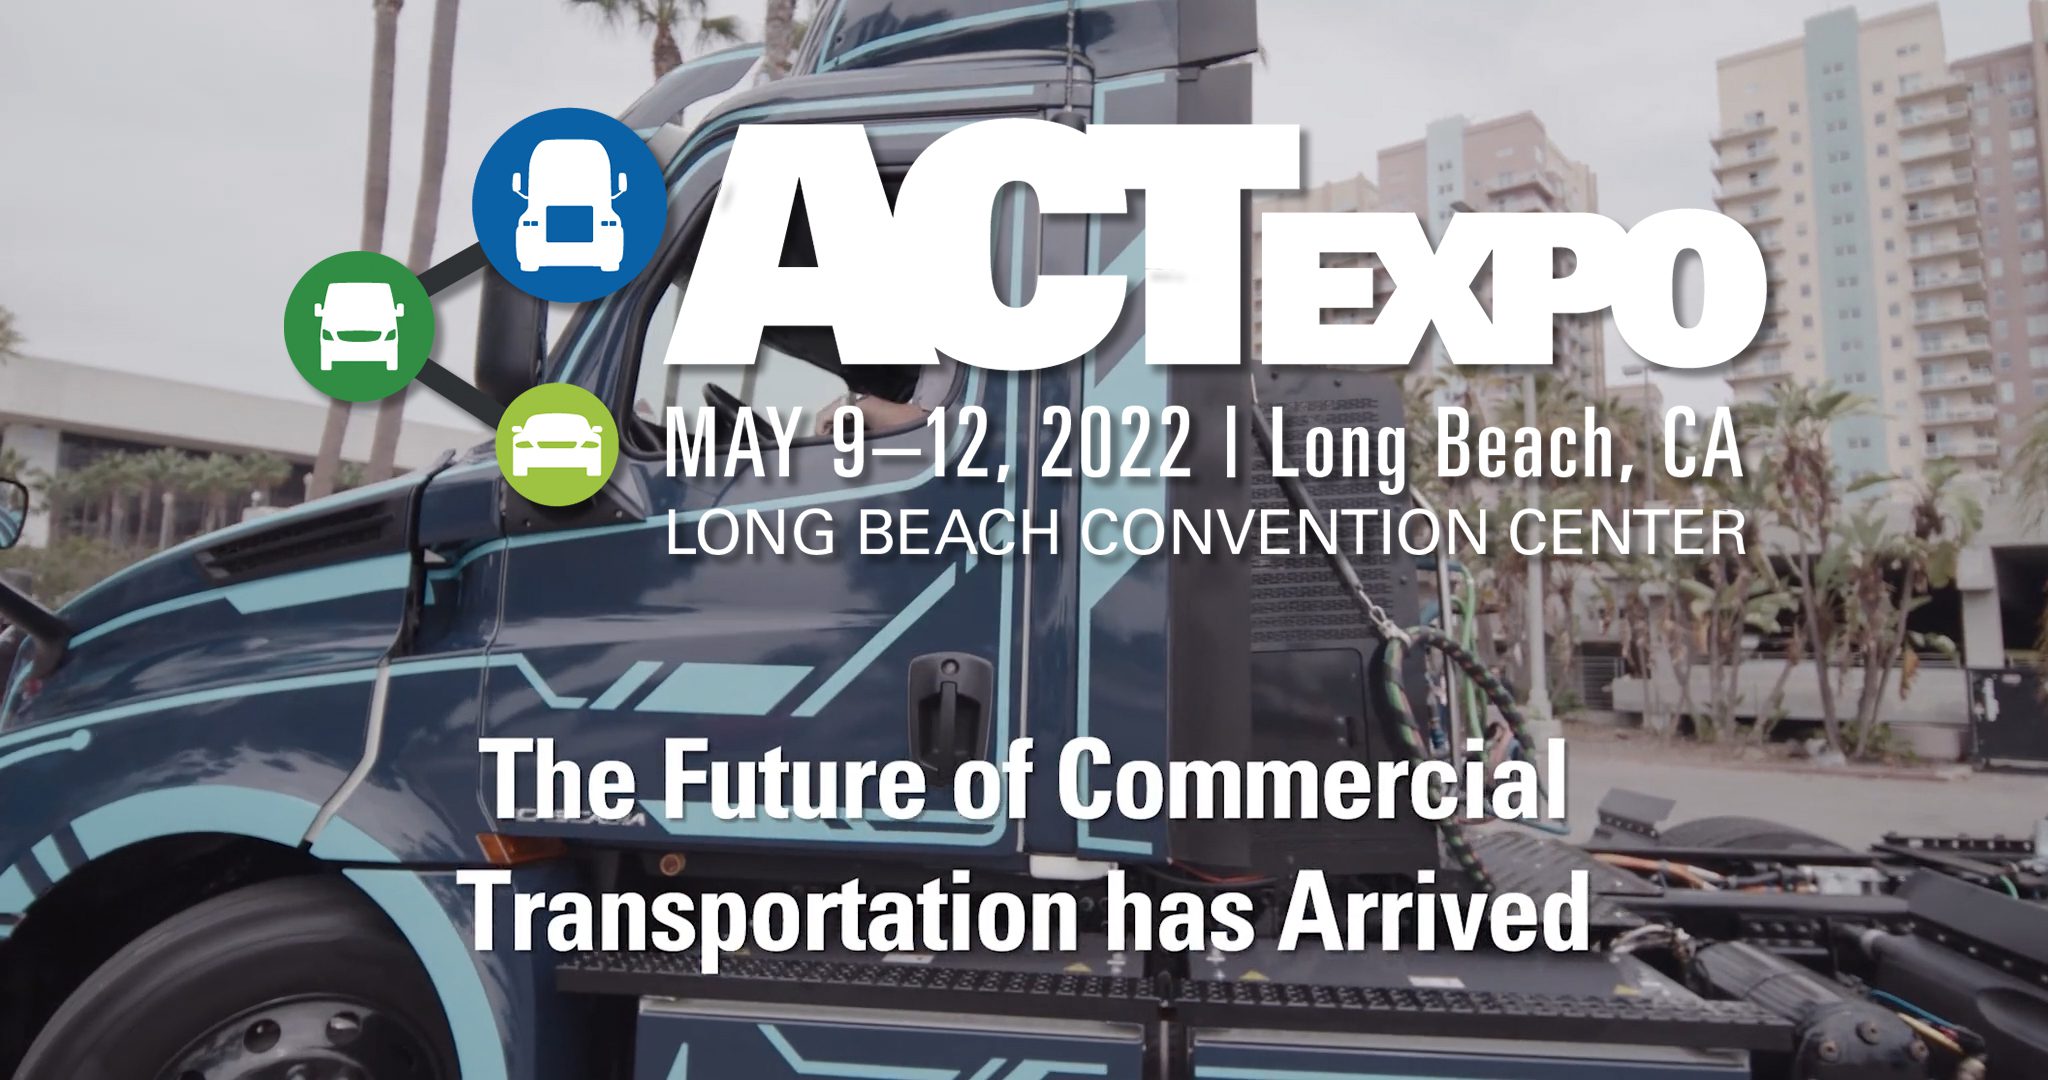 ACT Expo image of truck